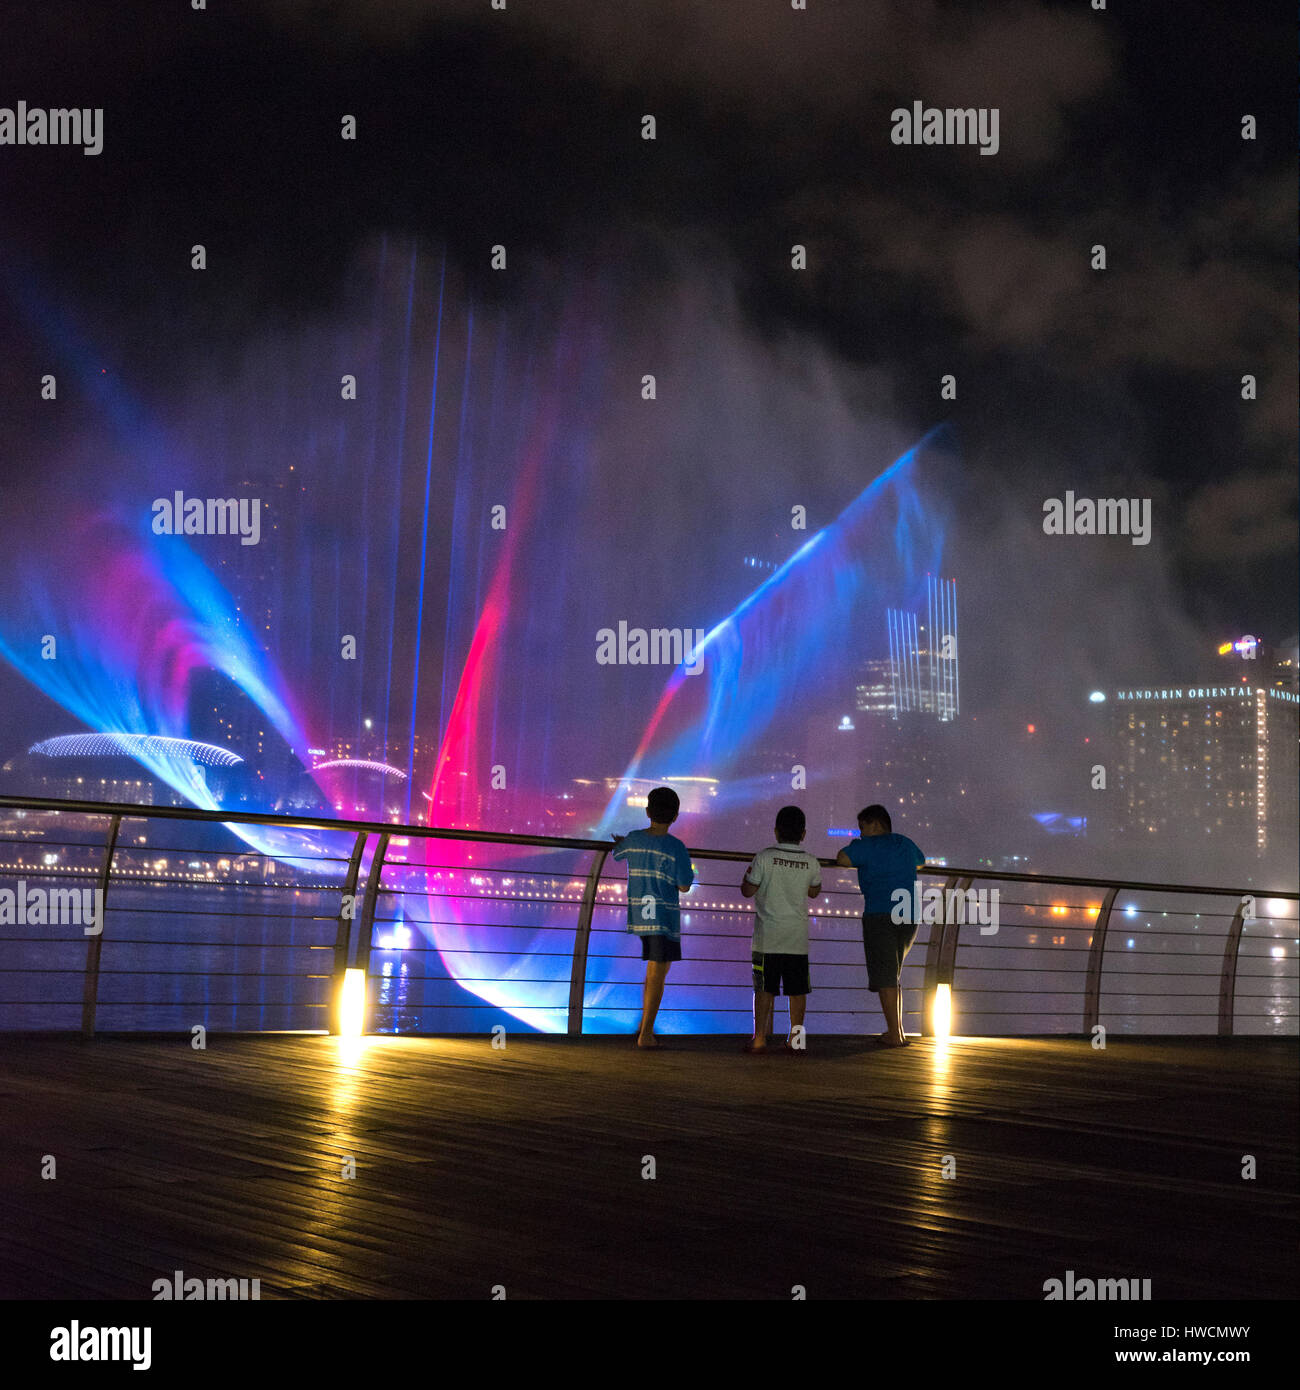 Square view of boys enjoying the Wonder Full light and sound show at night in Singapore. Stock Photo